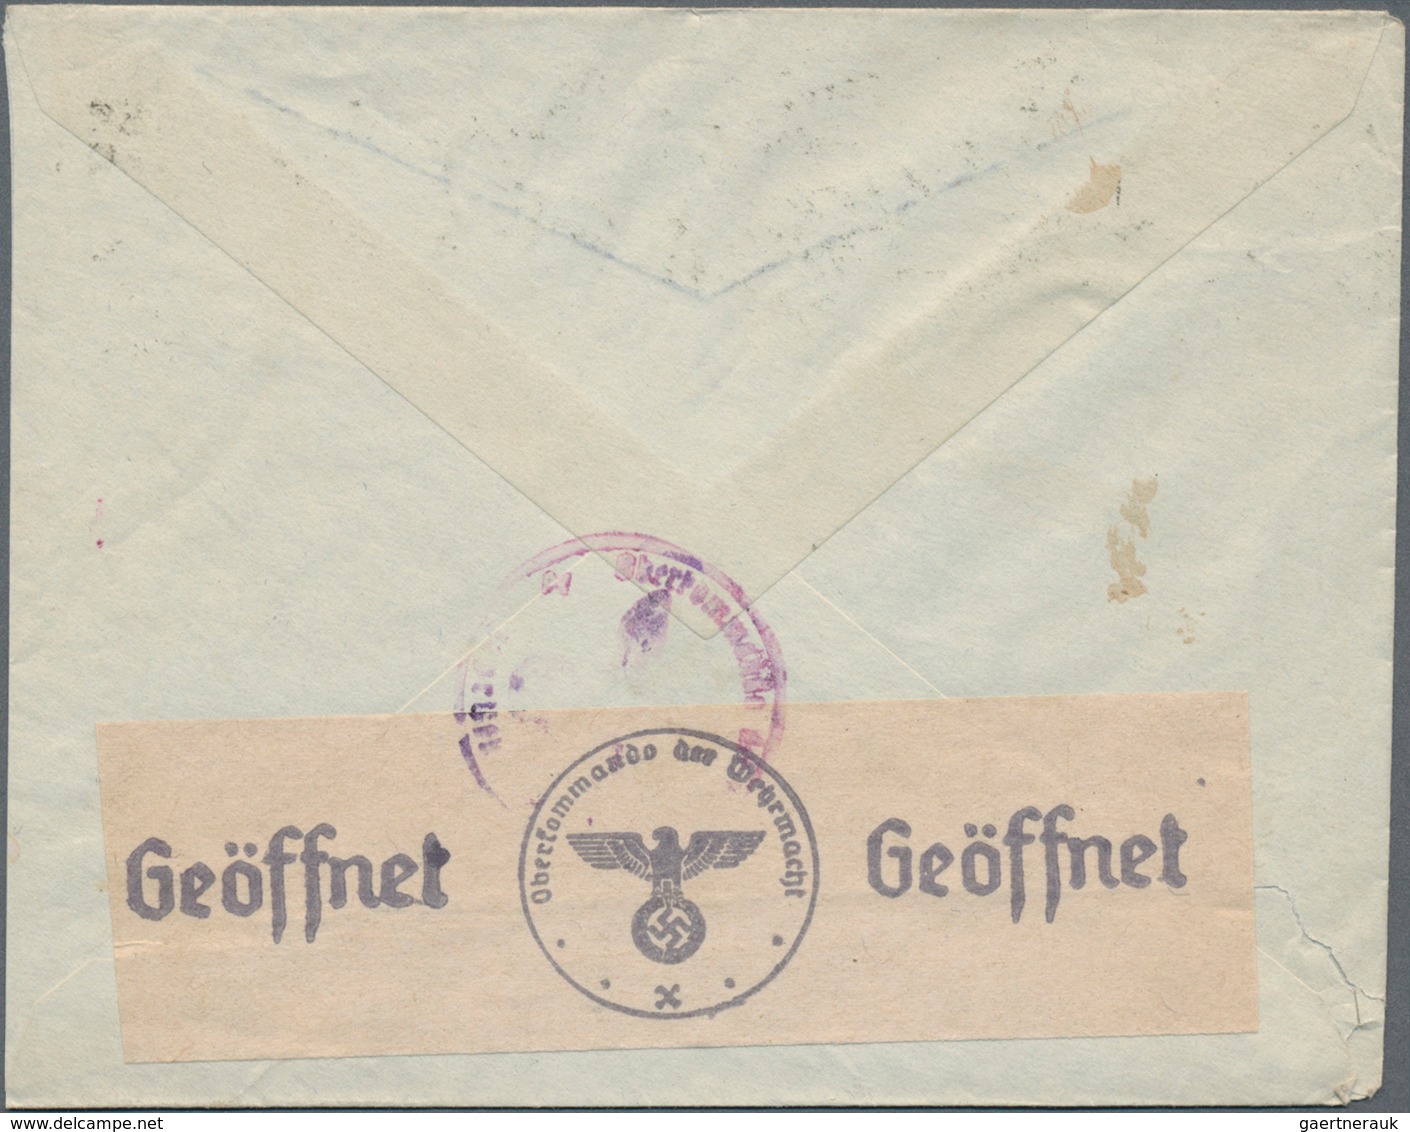 Algerien: 1940/44 ca. 460 letters mainly to the Red Cross in Geneva, almost everything with various